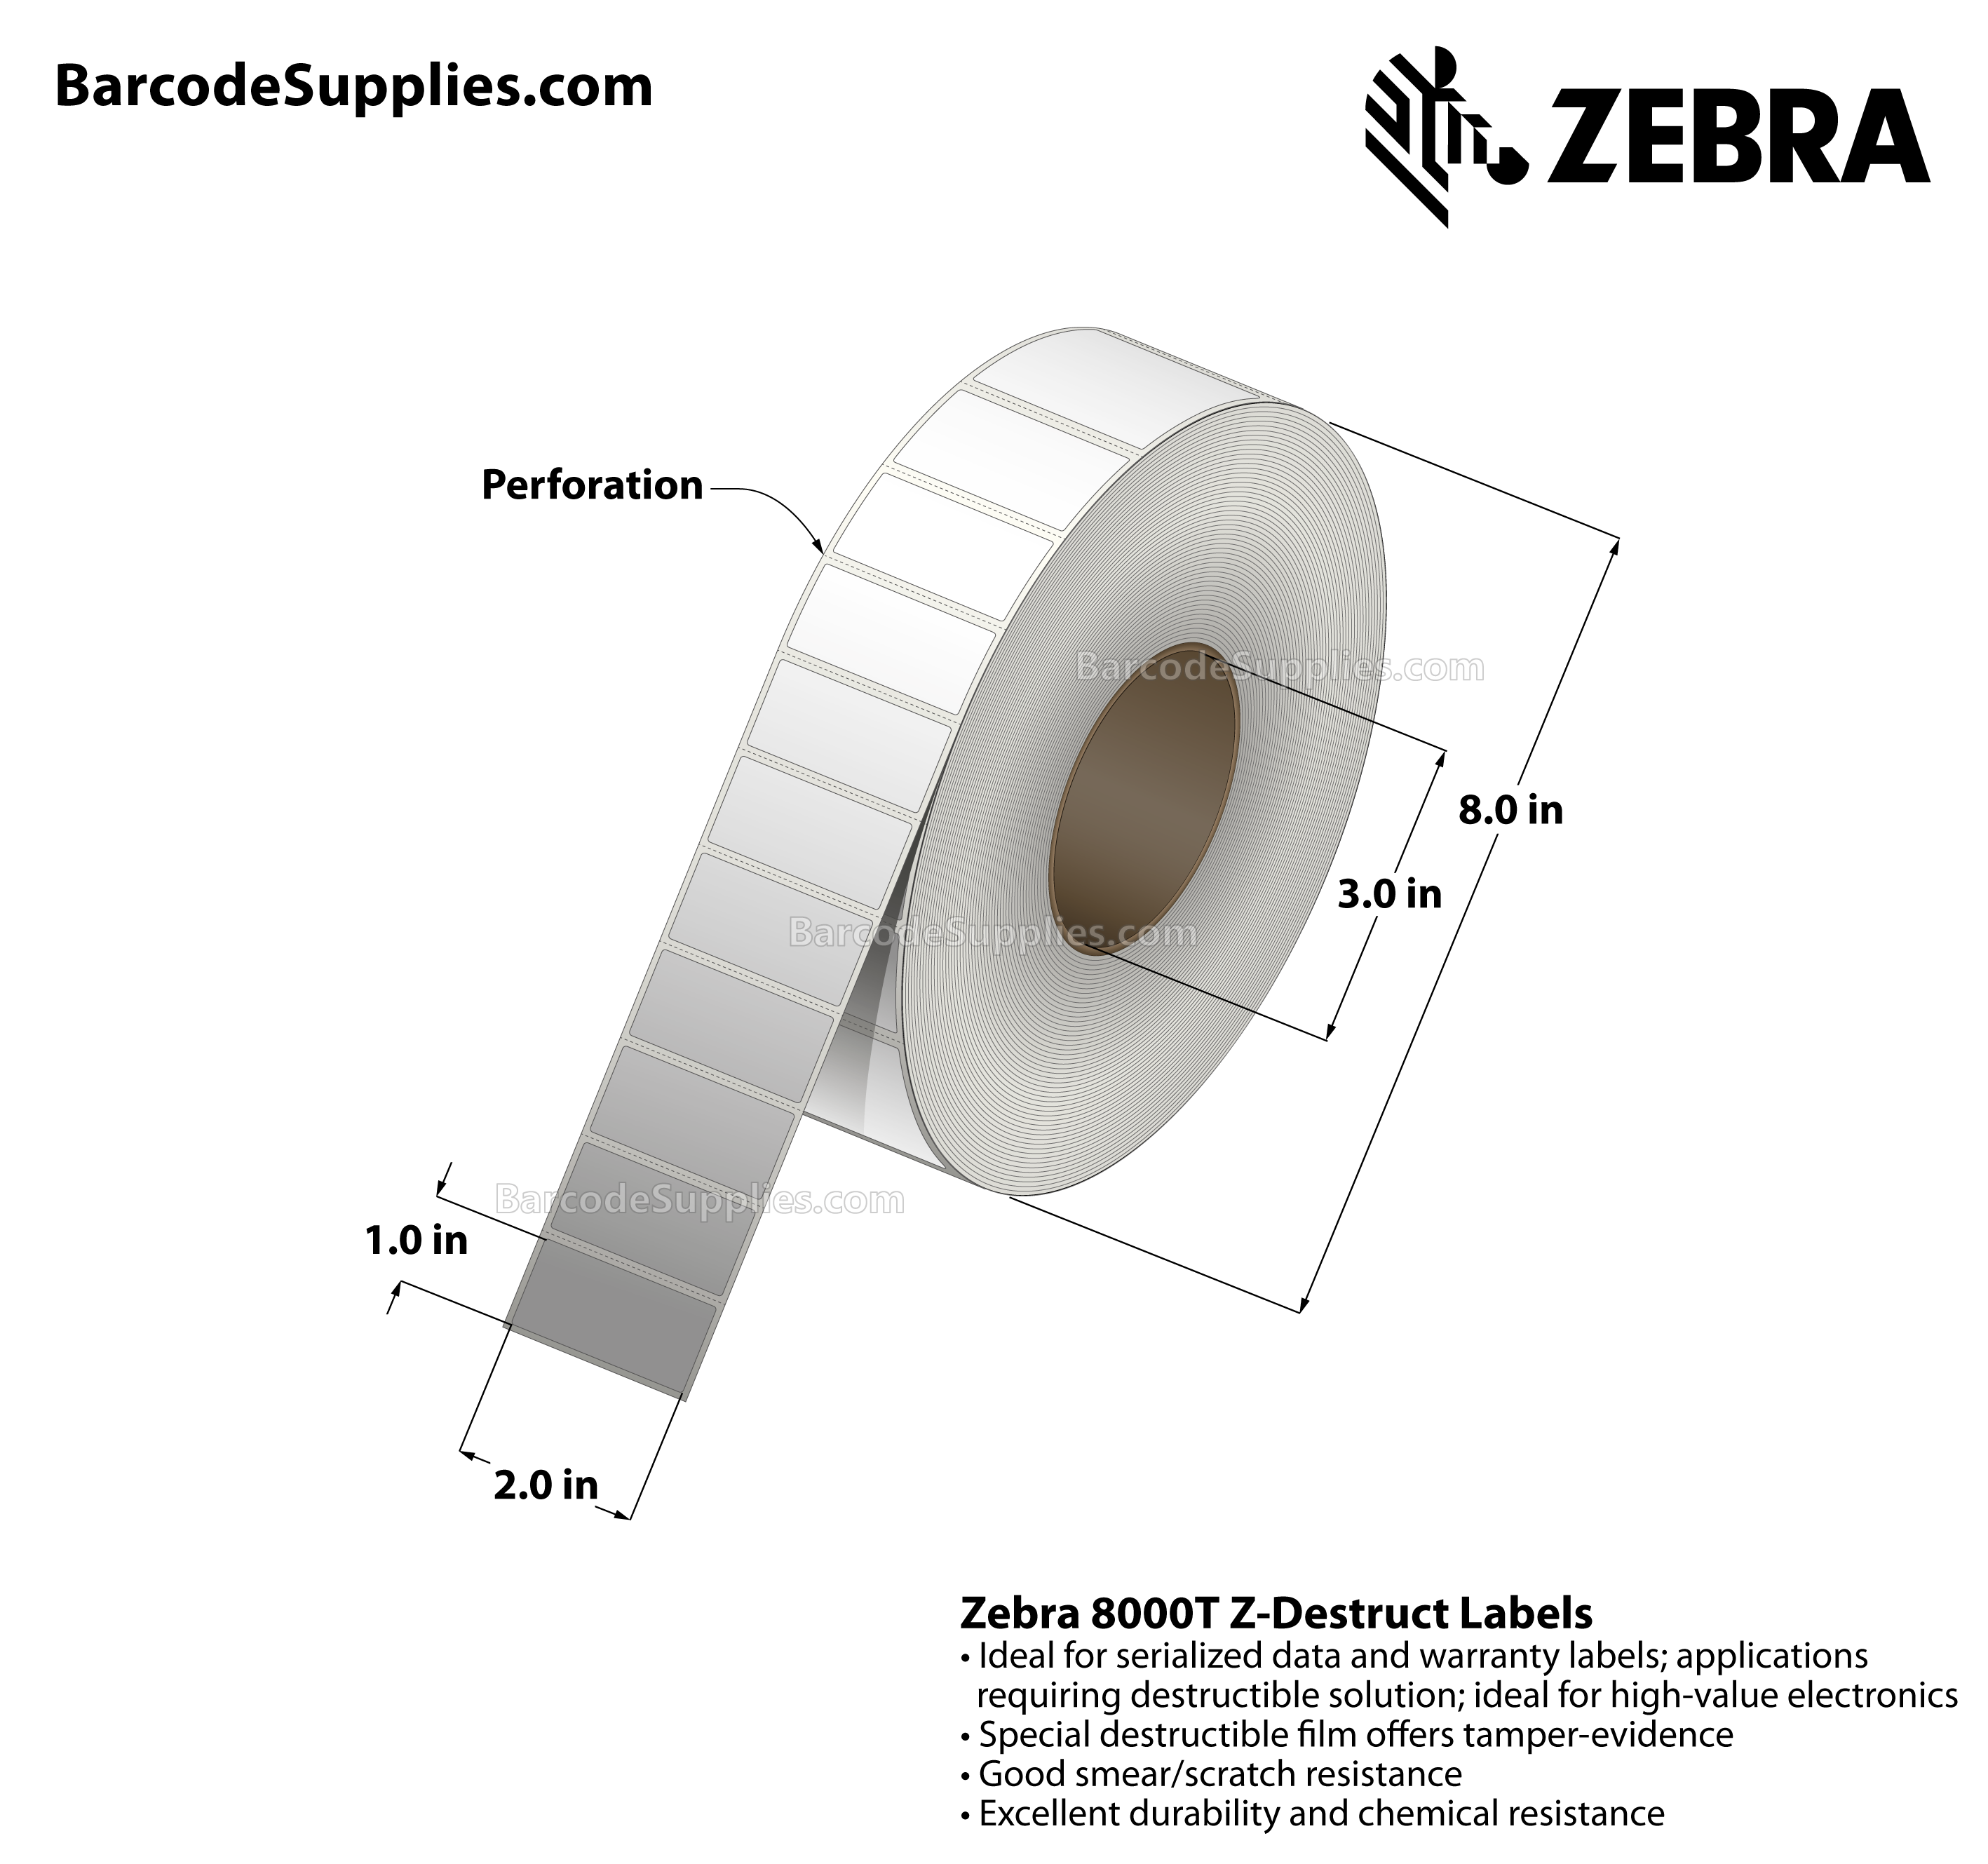 2 x 1 Thermal Transfer White 8000T Z-Destruct Labels With Tamper-evident Adhesive - Perforated - 3000 Labels Per Roll - Carton Of 1 Rolls - 3000 Labels Total - MPN: 10022927